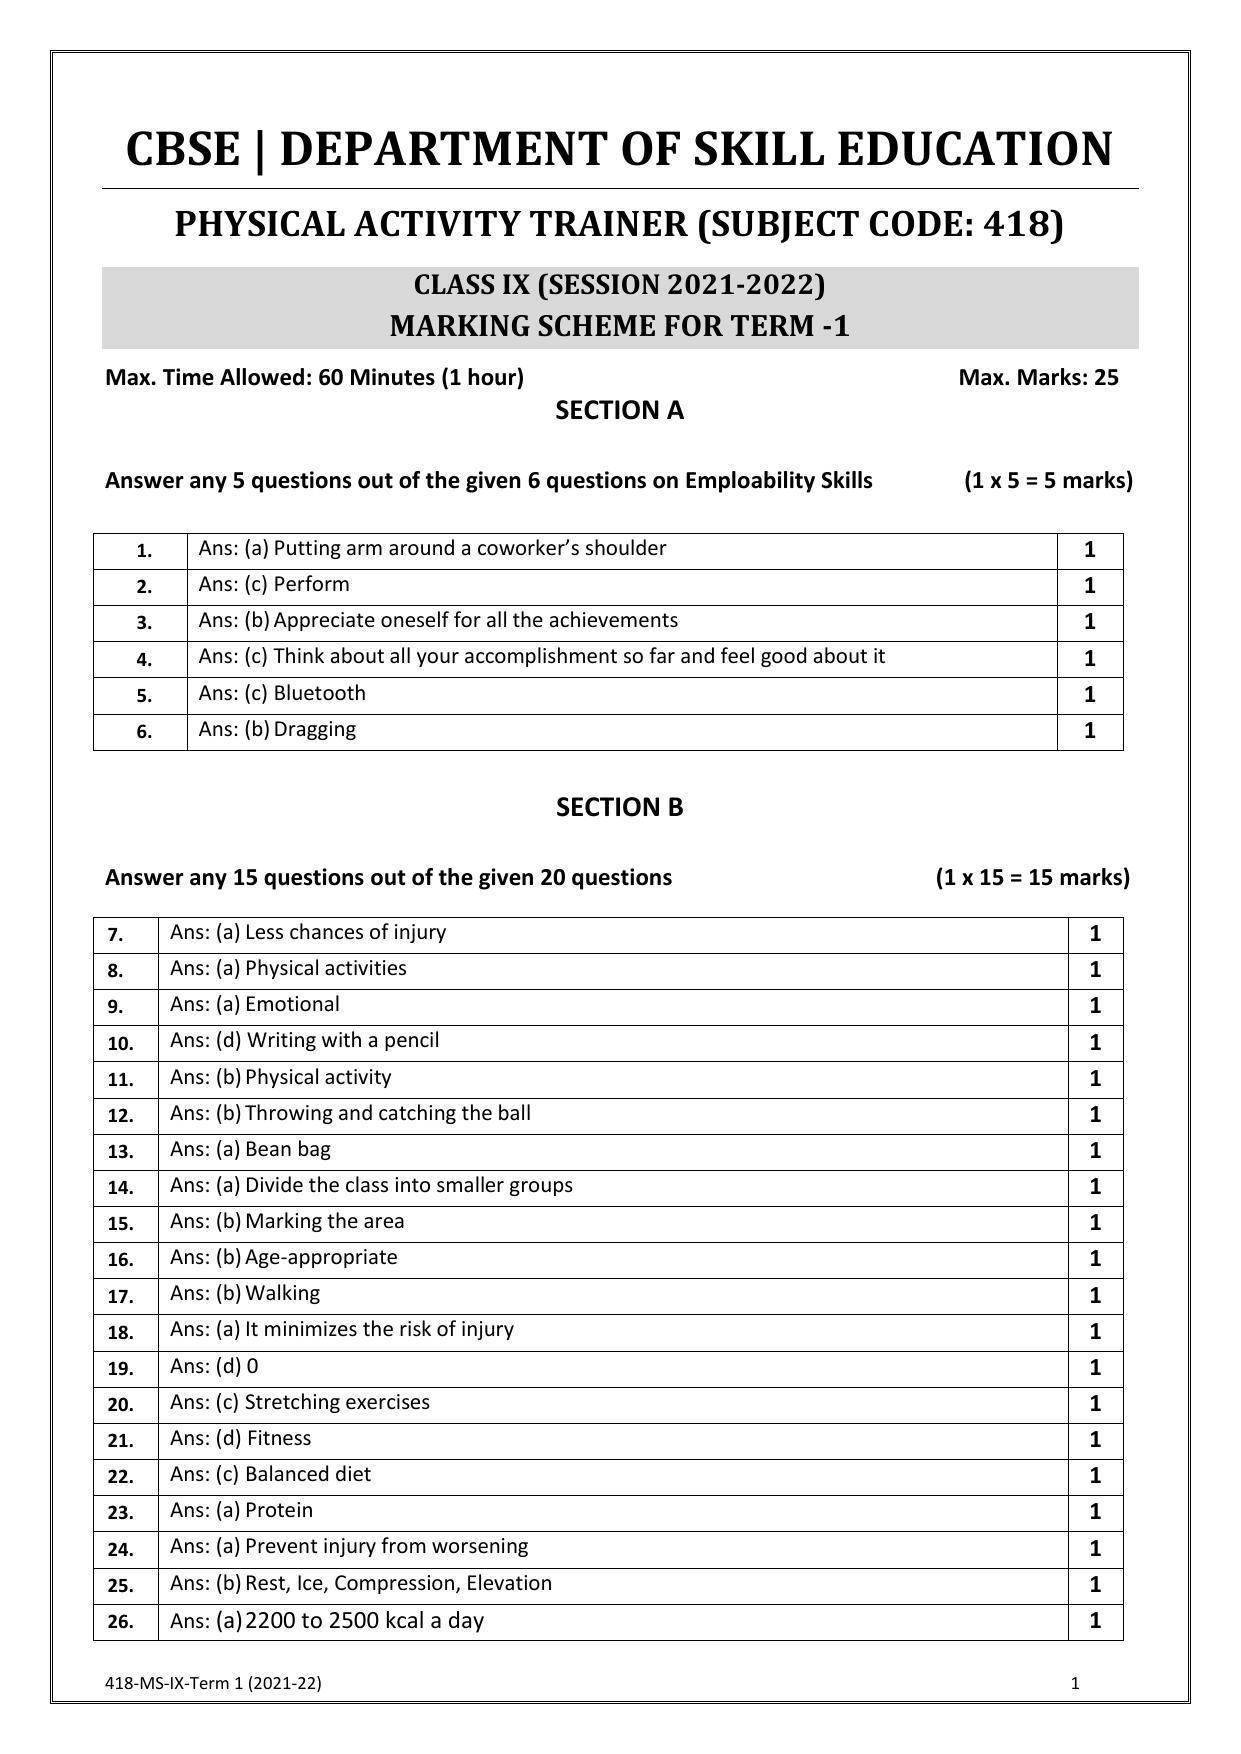 CBSE Class 10 Skill Education (Term I) - Physical Activity Trainer Marking Scheme 2021-22 - Page 1